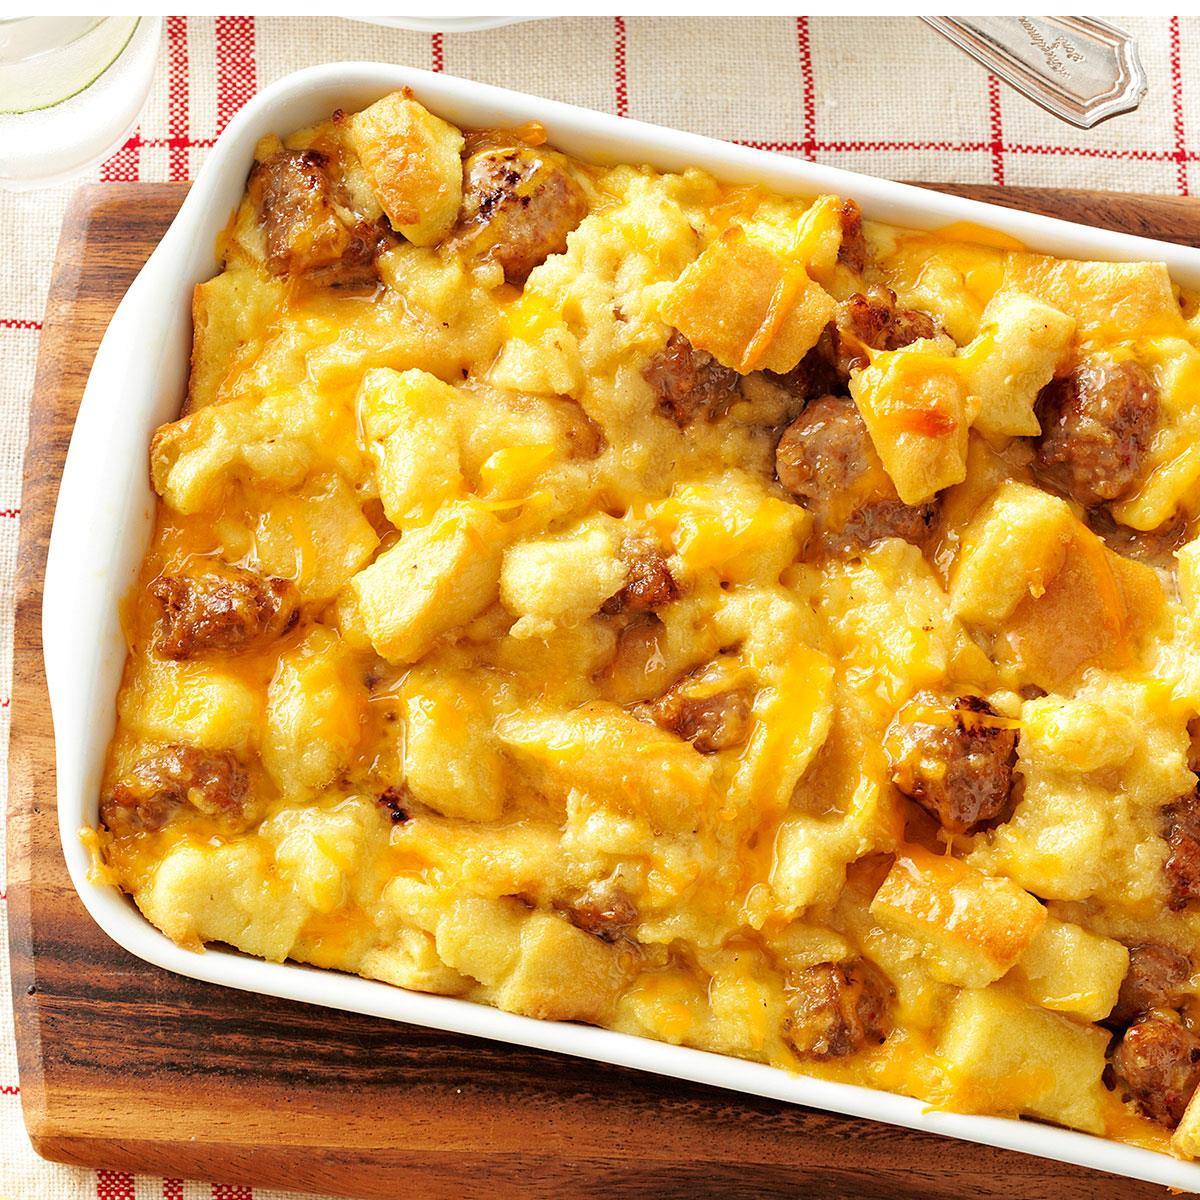 Sausage Egg And Cheese Casserole Without Bread
 Sausage and Egg Casserole Recipe